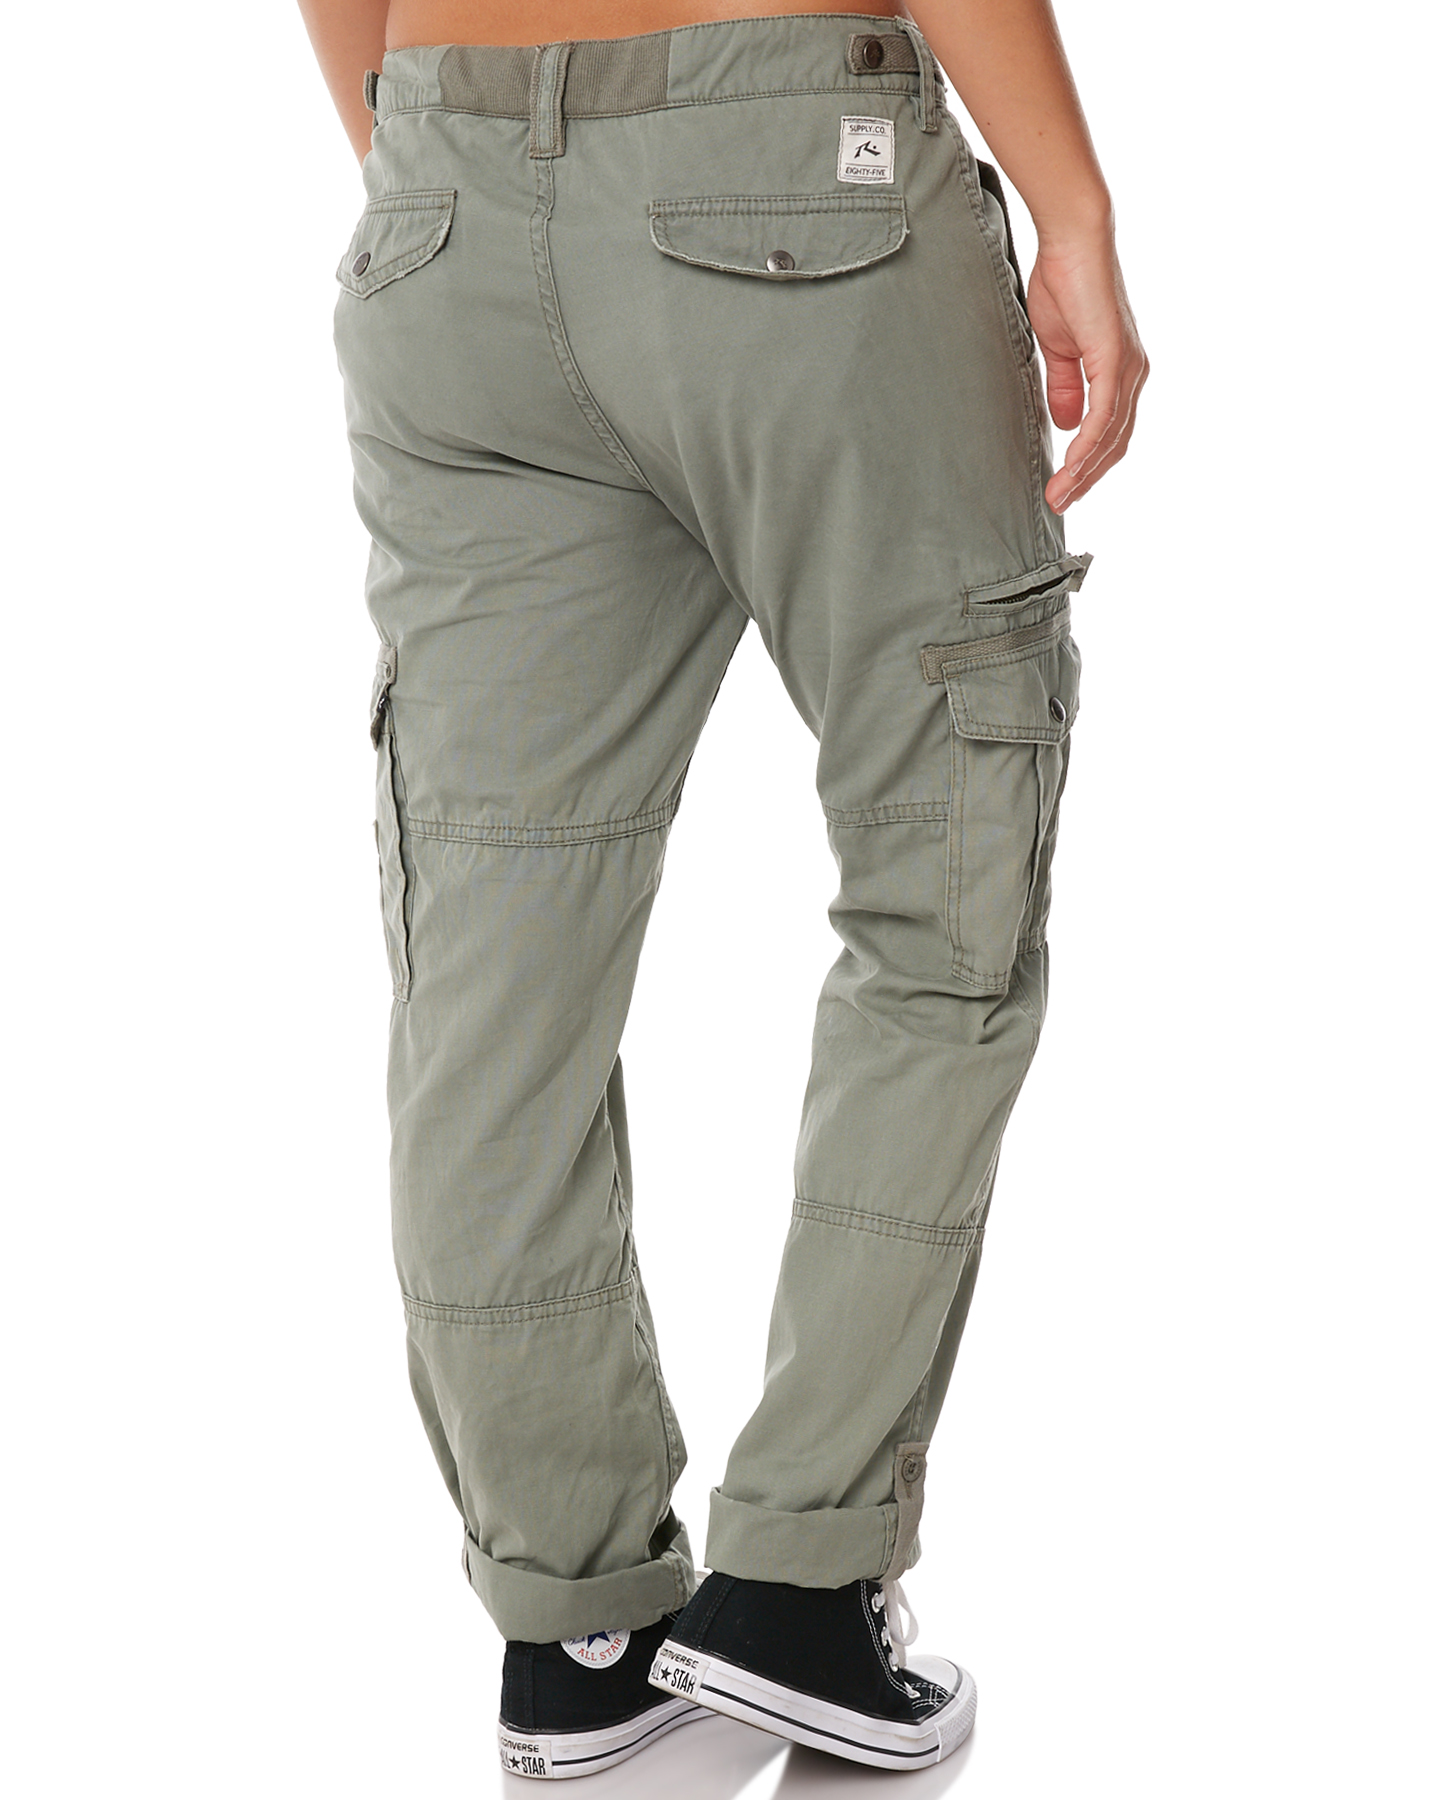 Rusty Cadet Pant - Army | SurfStitch